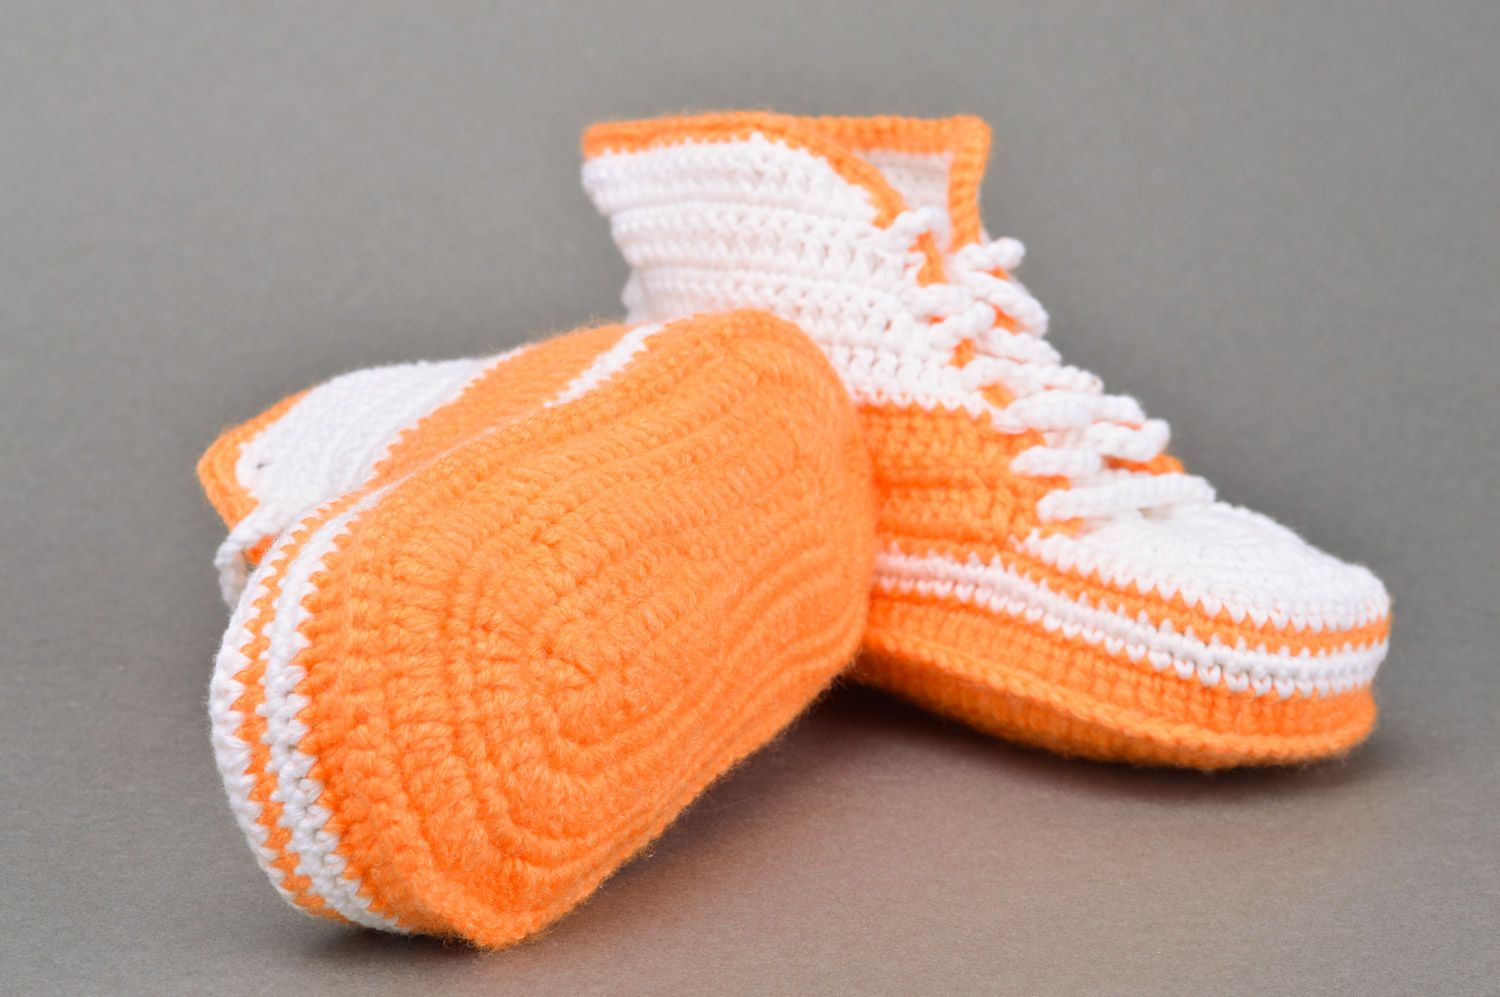 Handmade crocheted small orange and white baby shoes with shoelaces photo 5